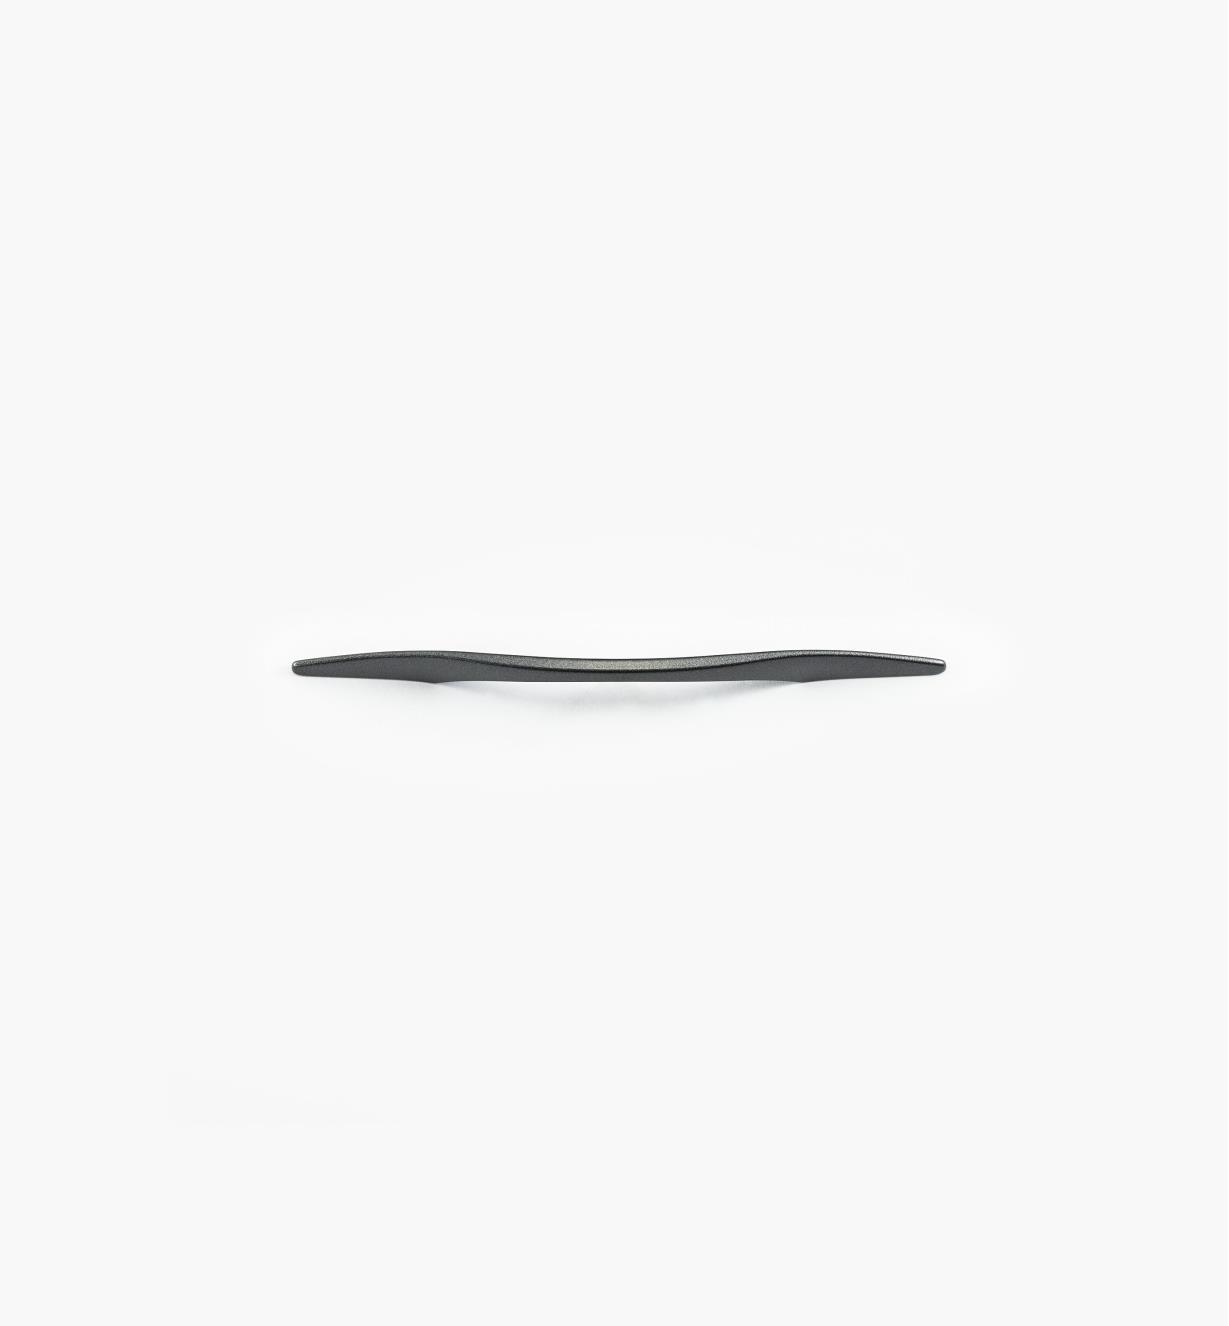 00W5523 - Seagull 128mm/160mm (218mm) Graphite Handle